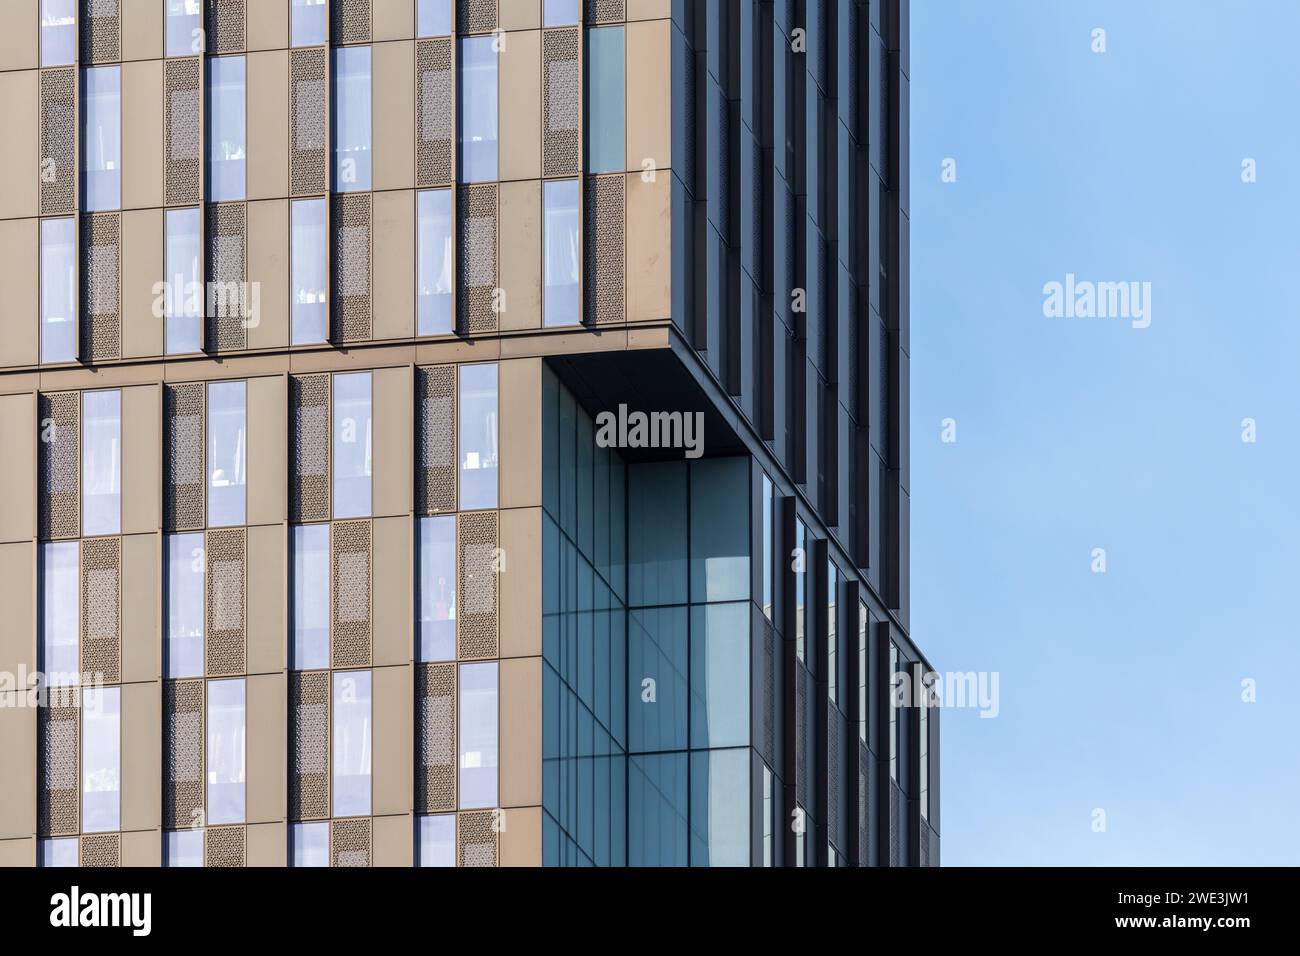 Close up and detailed image of the cladding and facade of Artisan Heights student accommodation, Manchester, UK Stock Photo